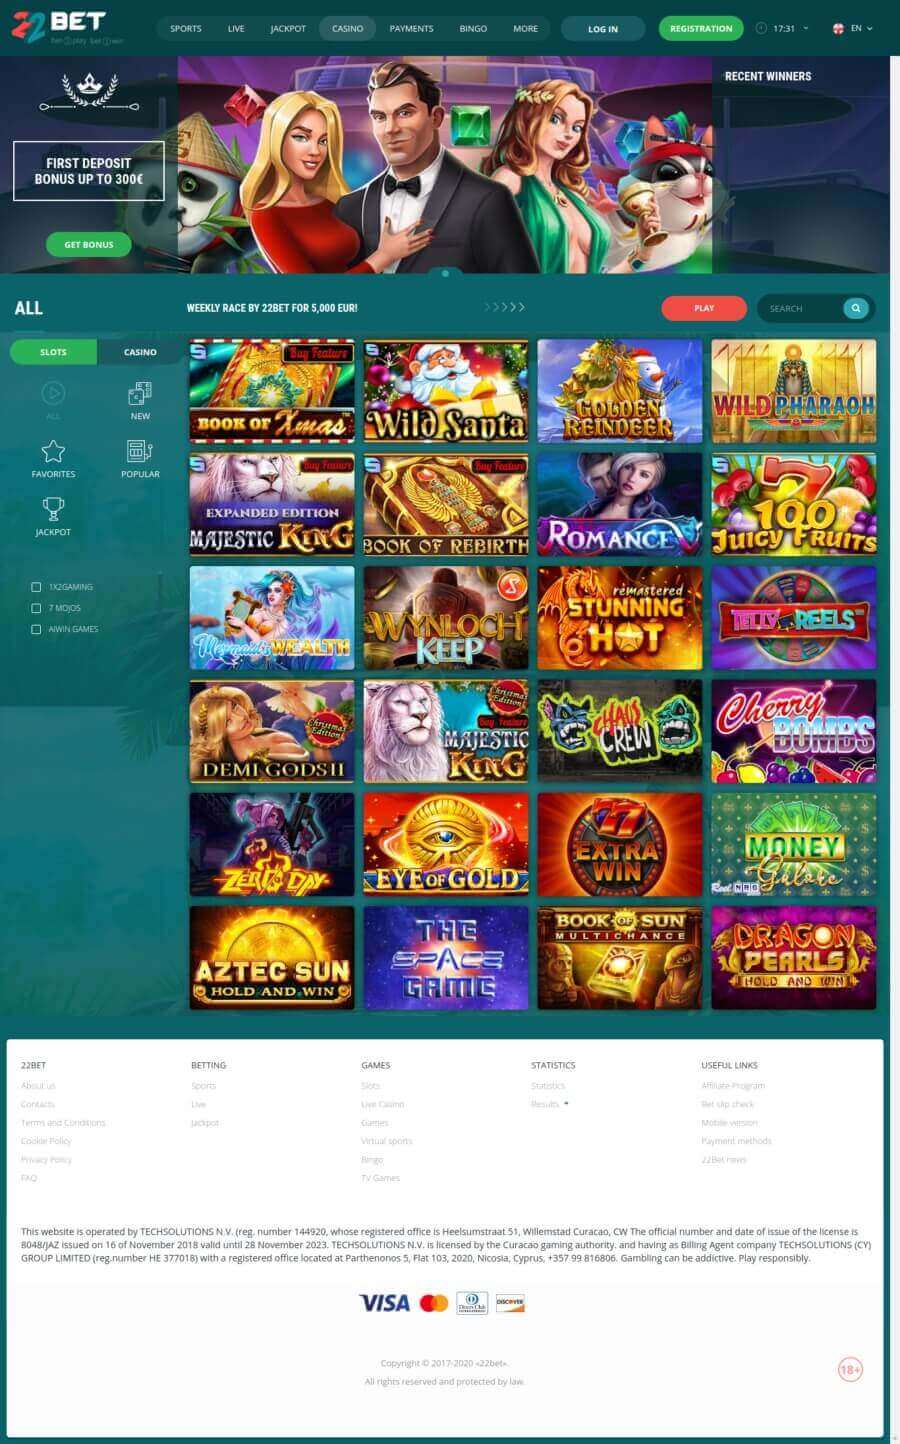 22Bet Casino and Sportsbook Review